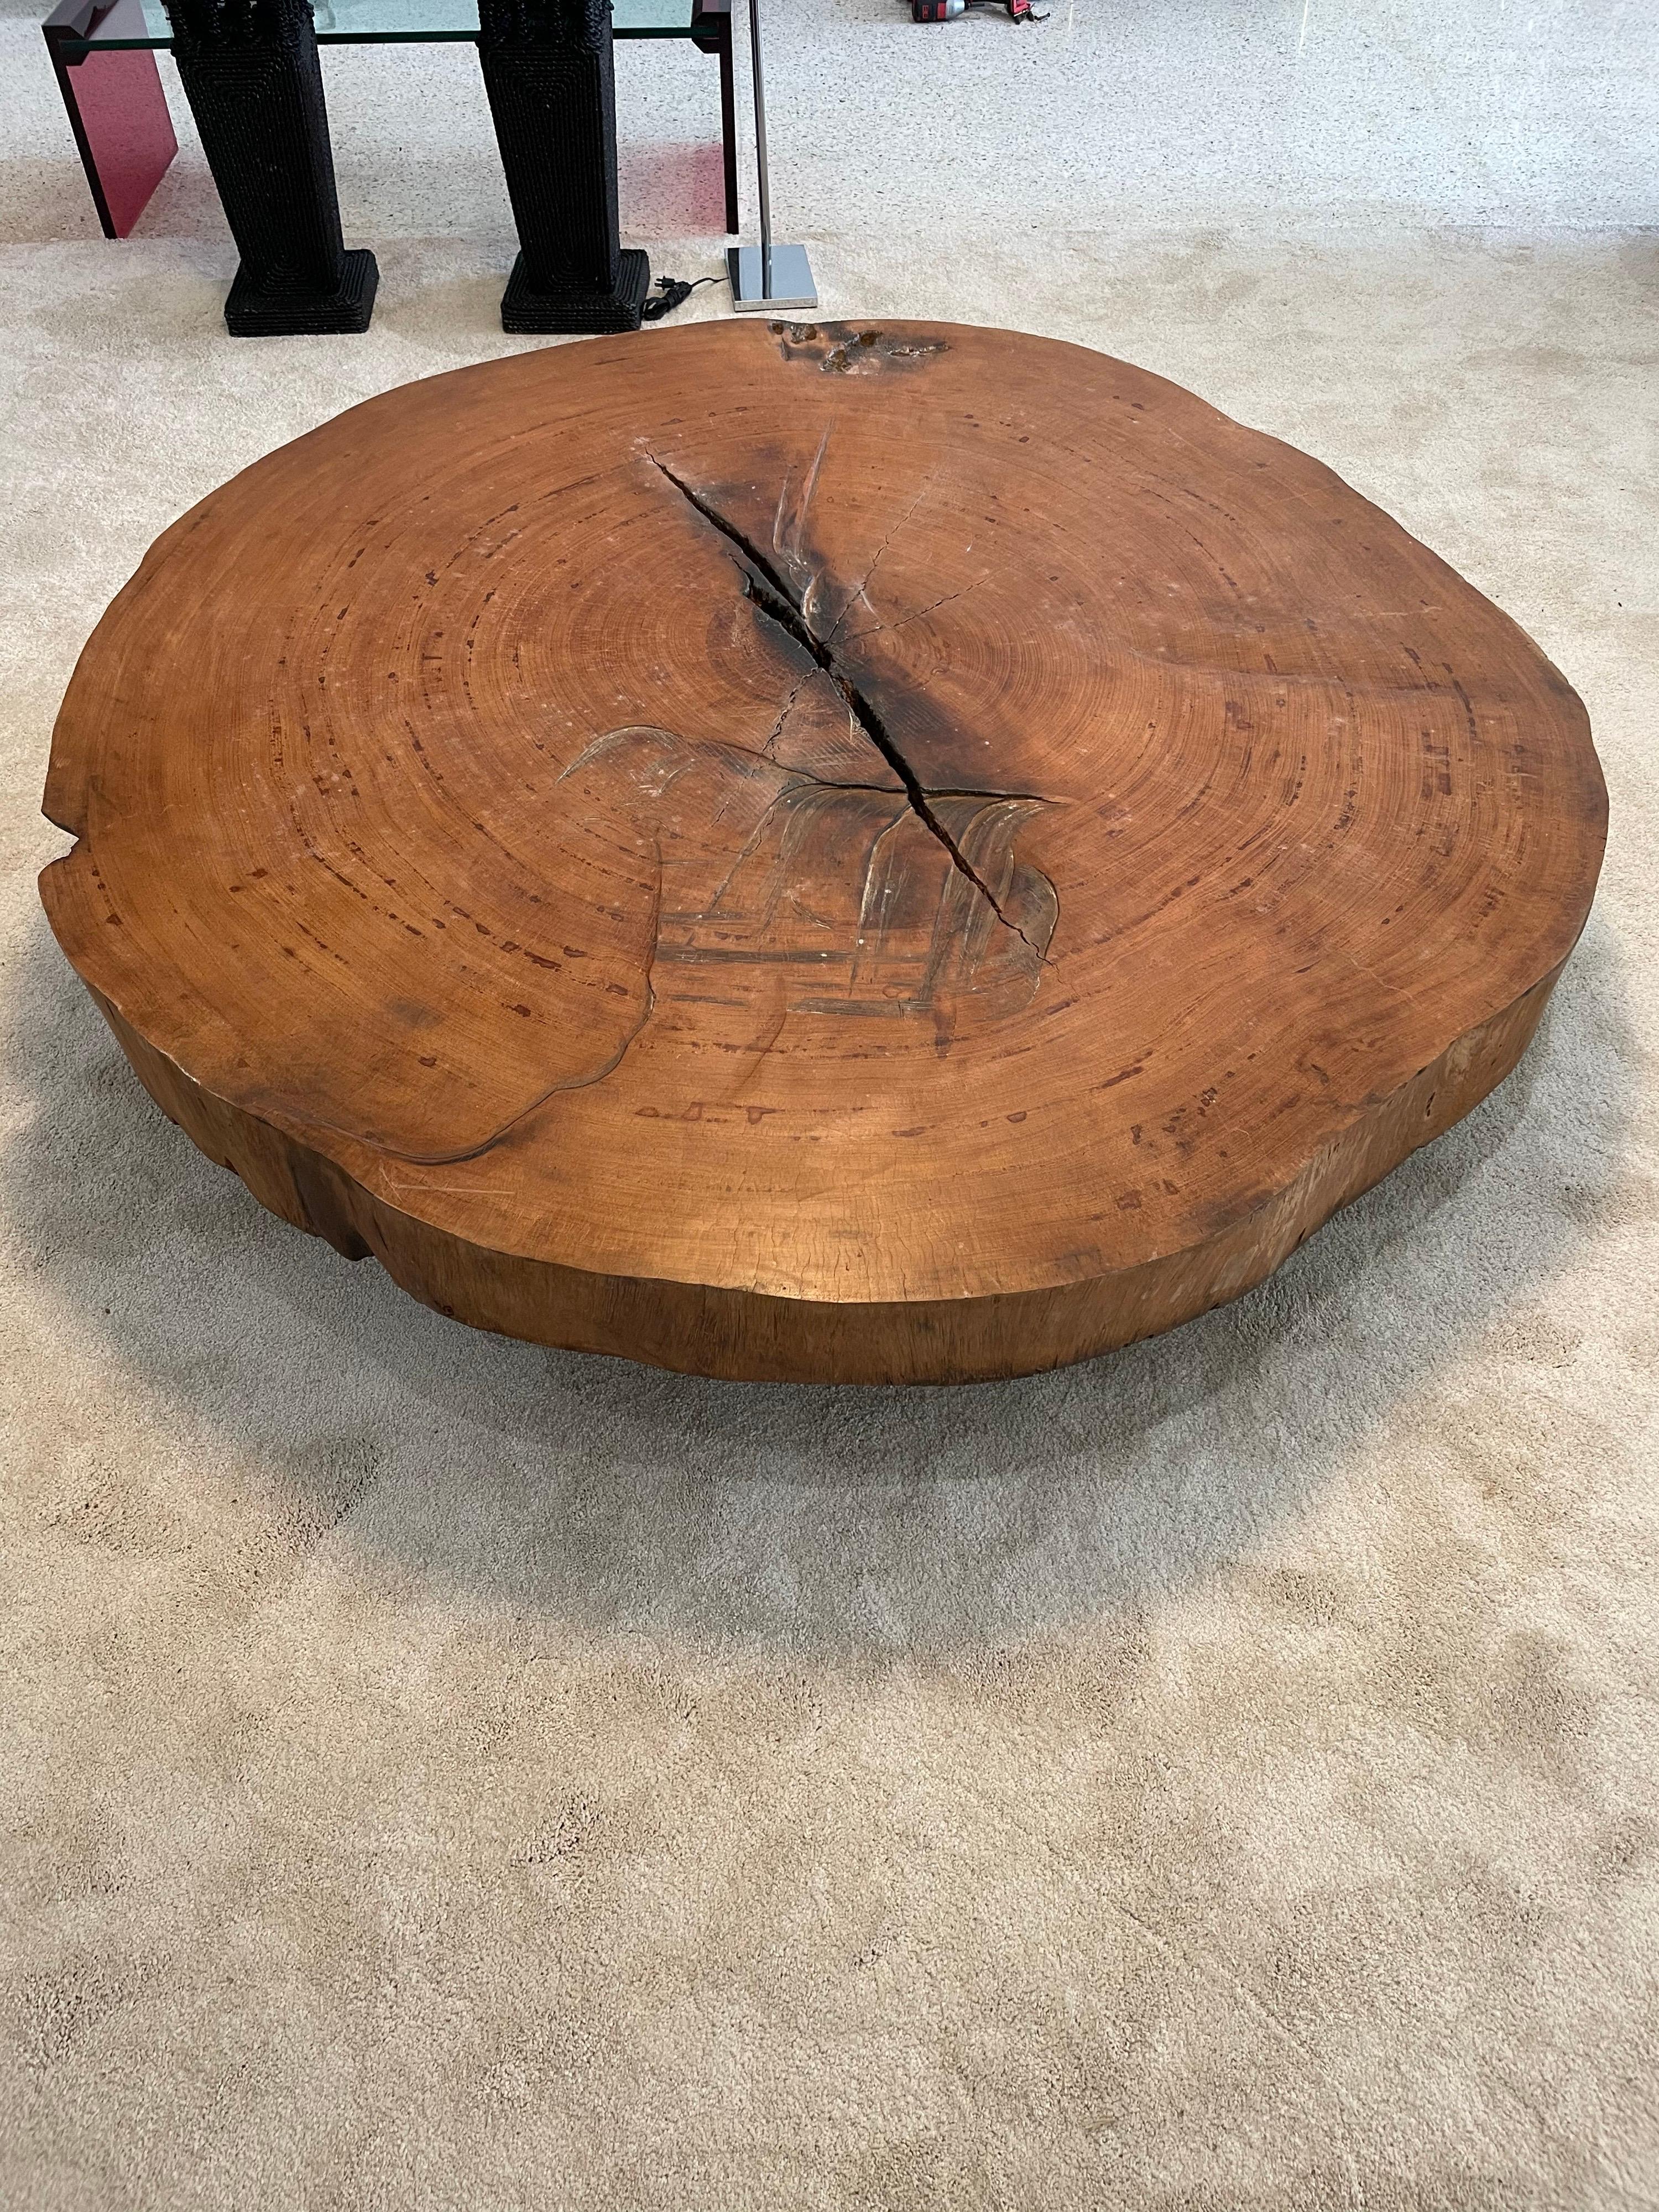 This live edge Brazilian tree trunk in peroba wood is over 5 feet in diameter with 5 iron cylindrical base legs. This slice of a tree is 7 inches thick. Very modern and yet very organic!